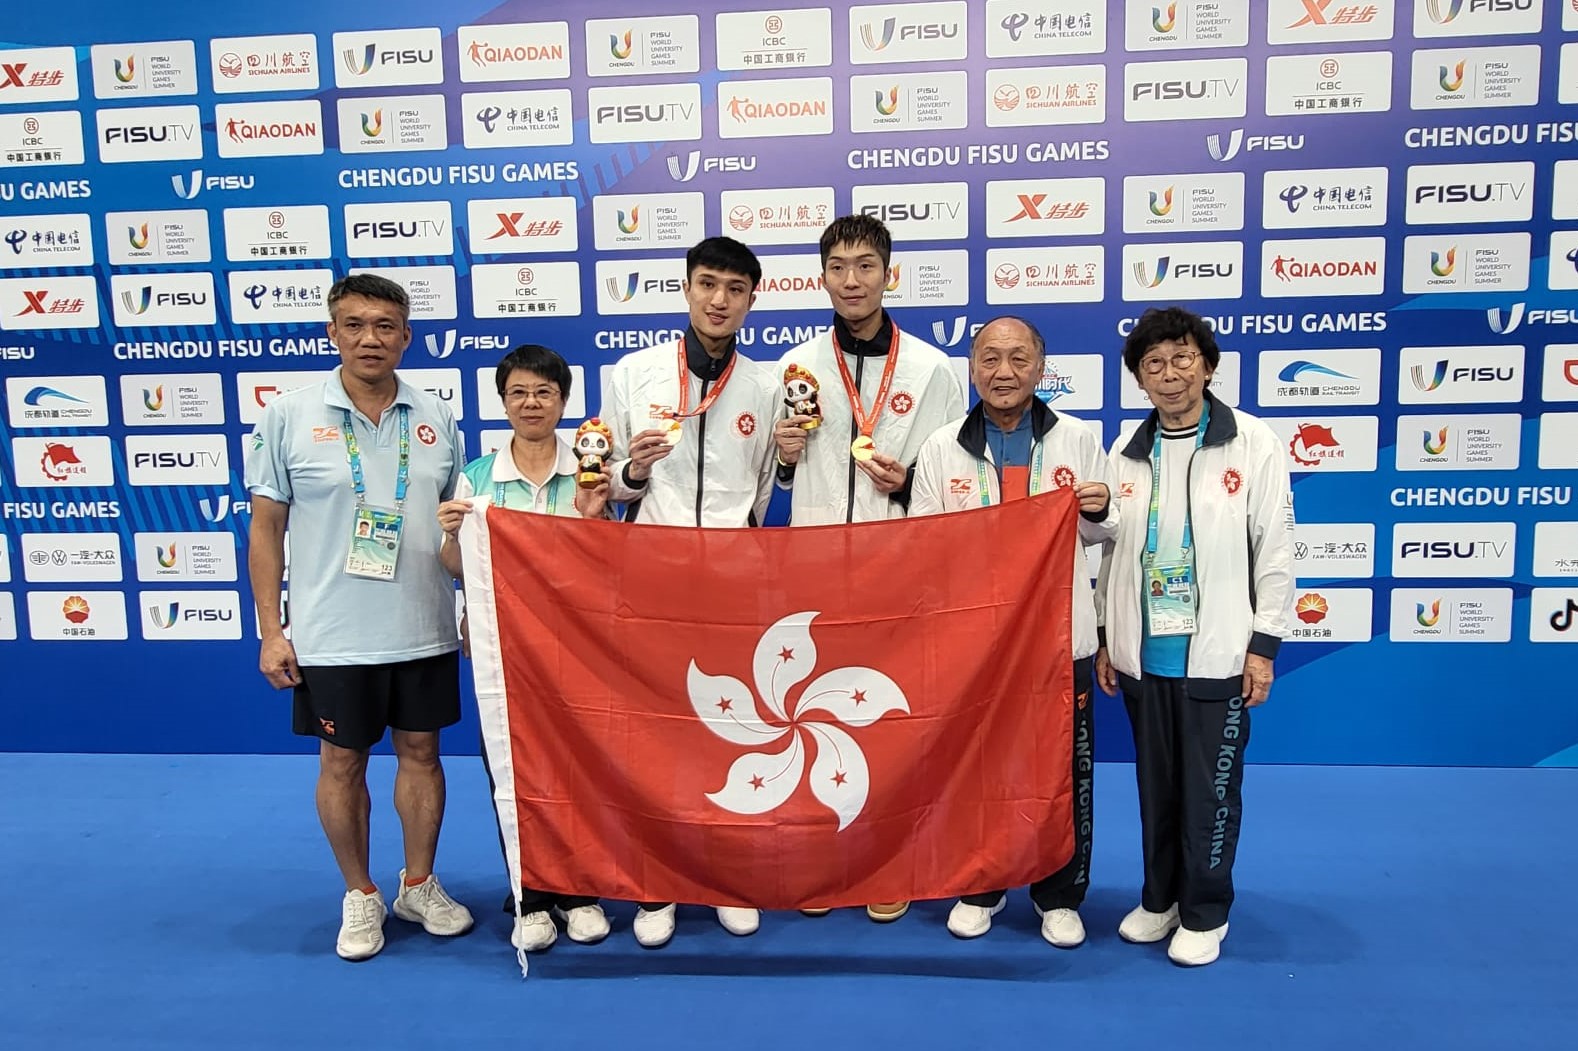 Cheung Ka-long (third right) wins the gold medal in the Men’s Foil Individual final at the FISU World University Games.